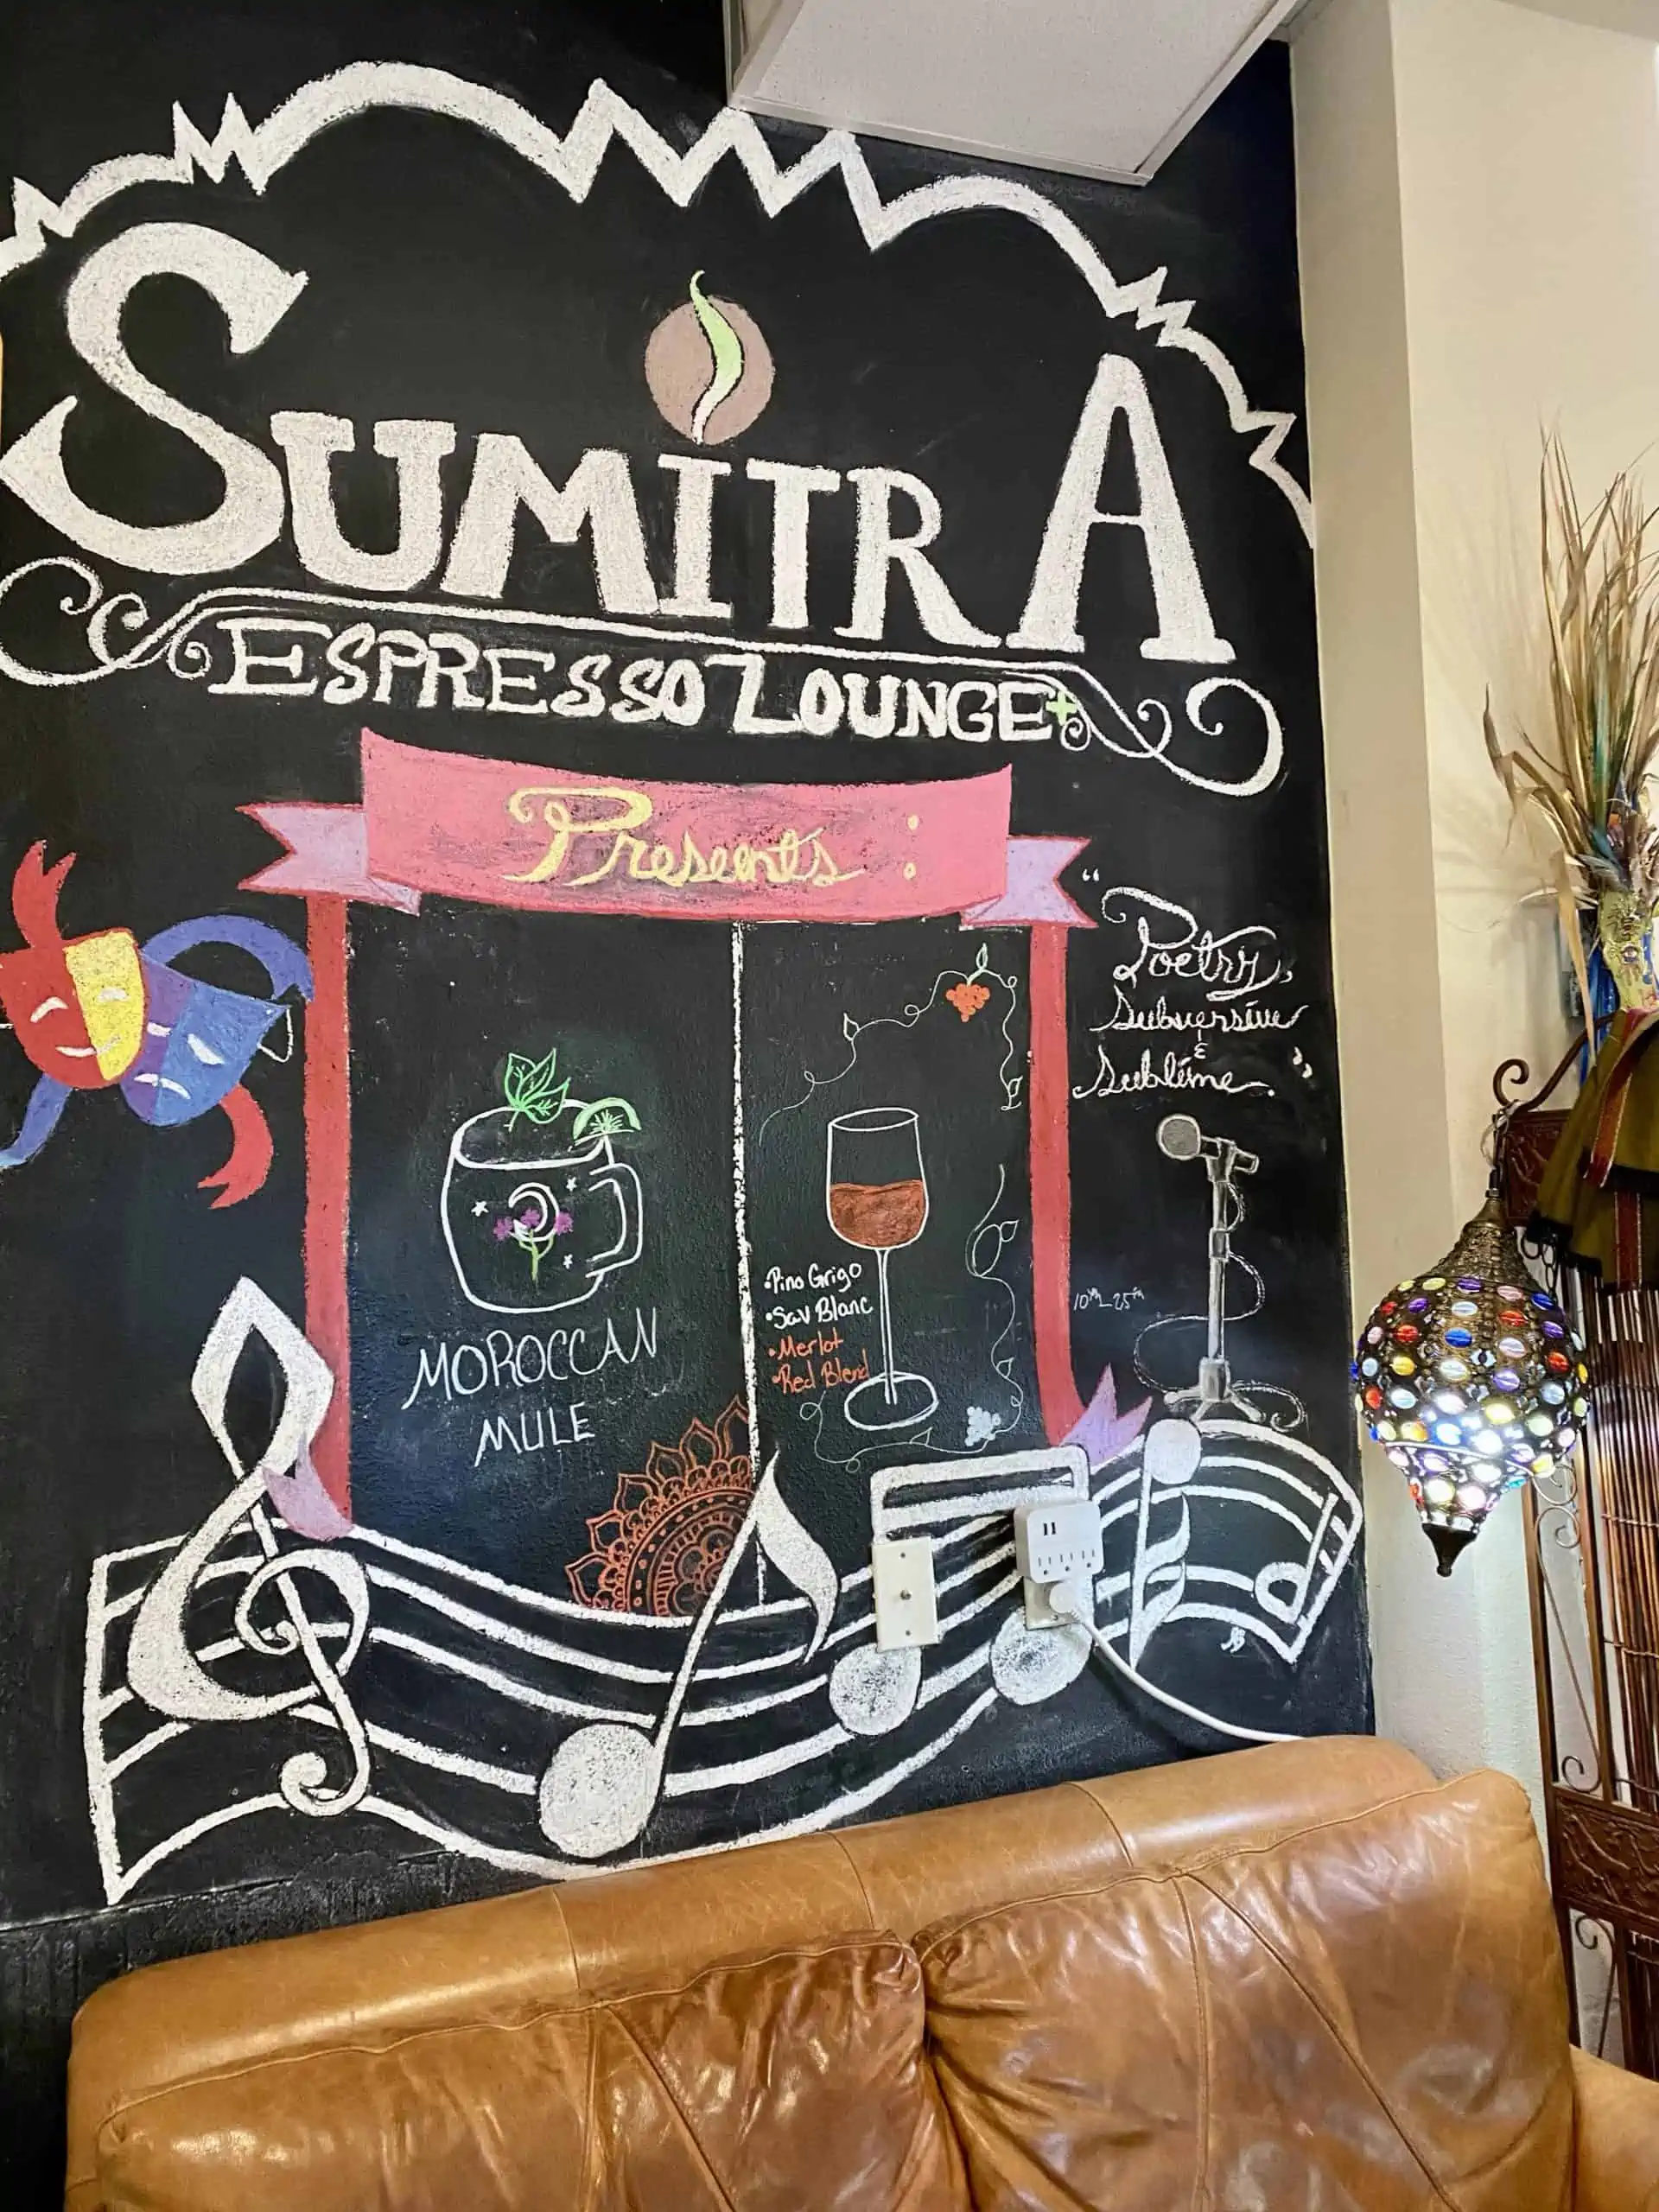 Sumitra Expresso Lounge, Restaurants in Gulfport Florida  showing the sign with Moroccan mule as a drink special